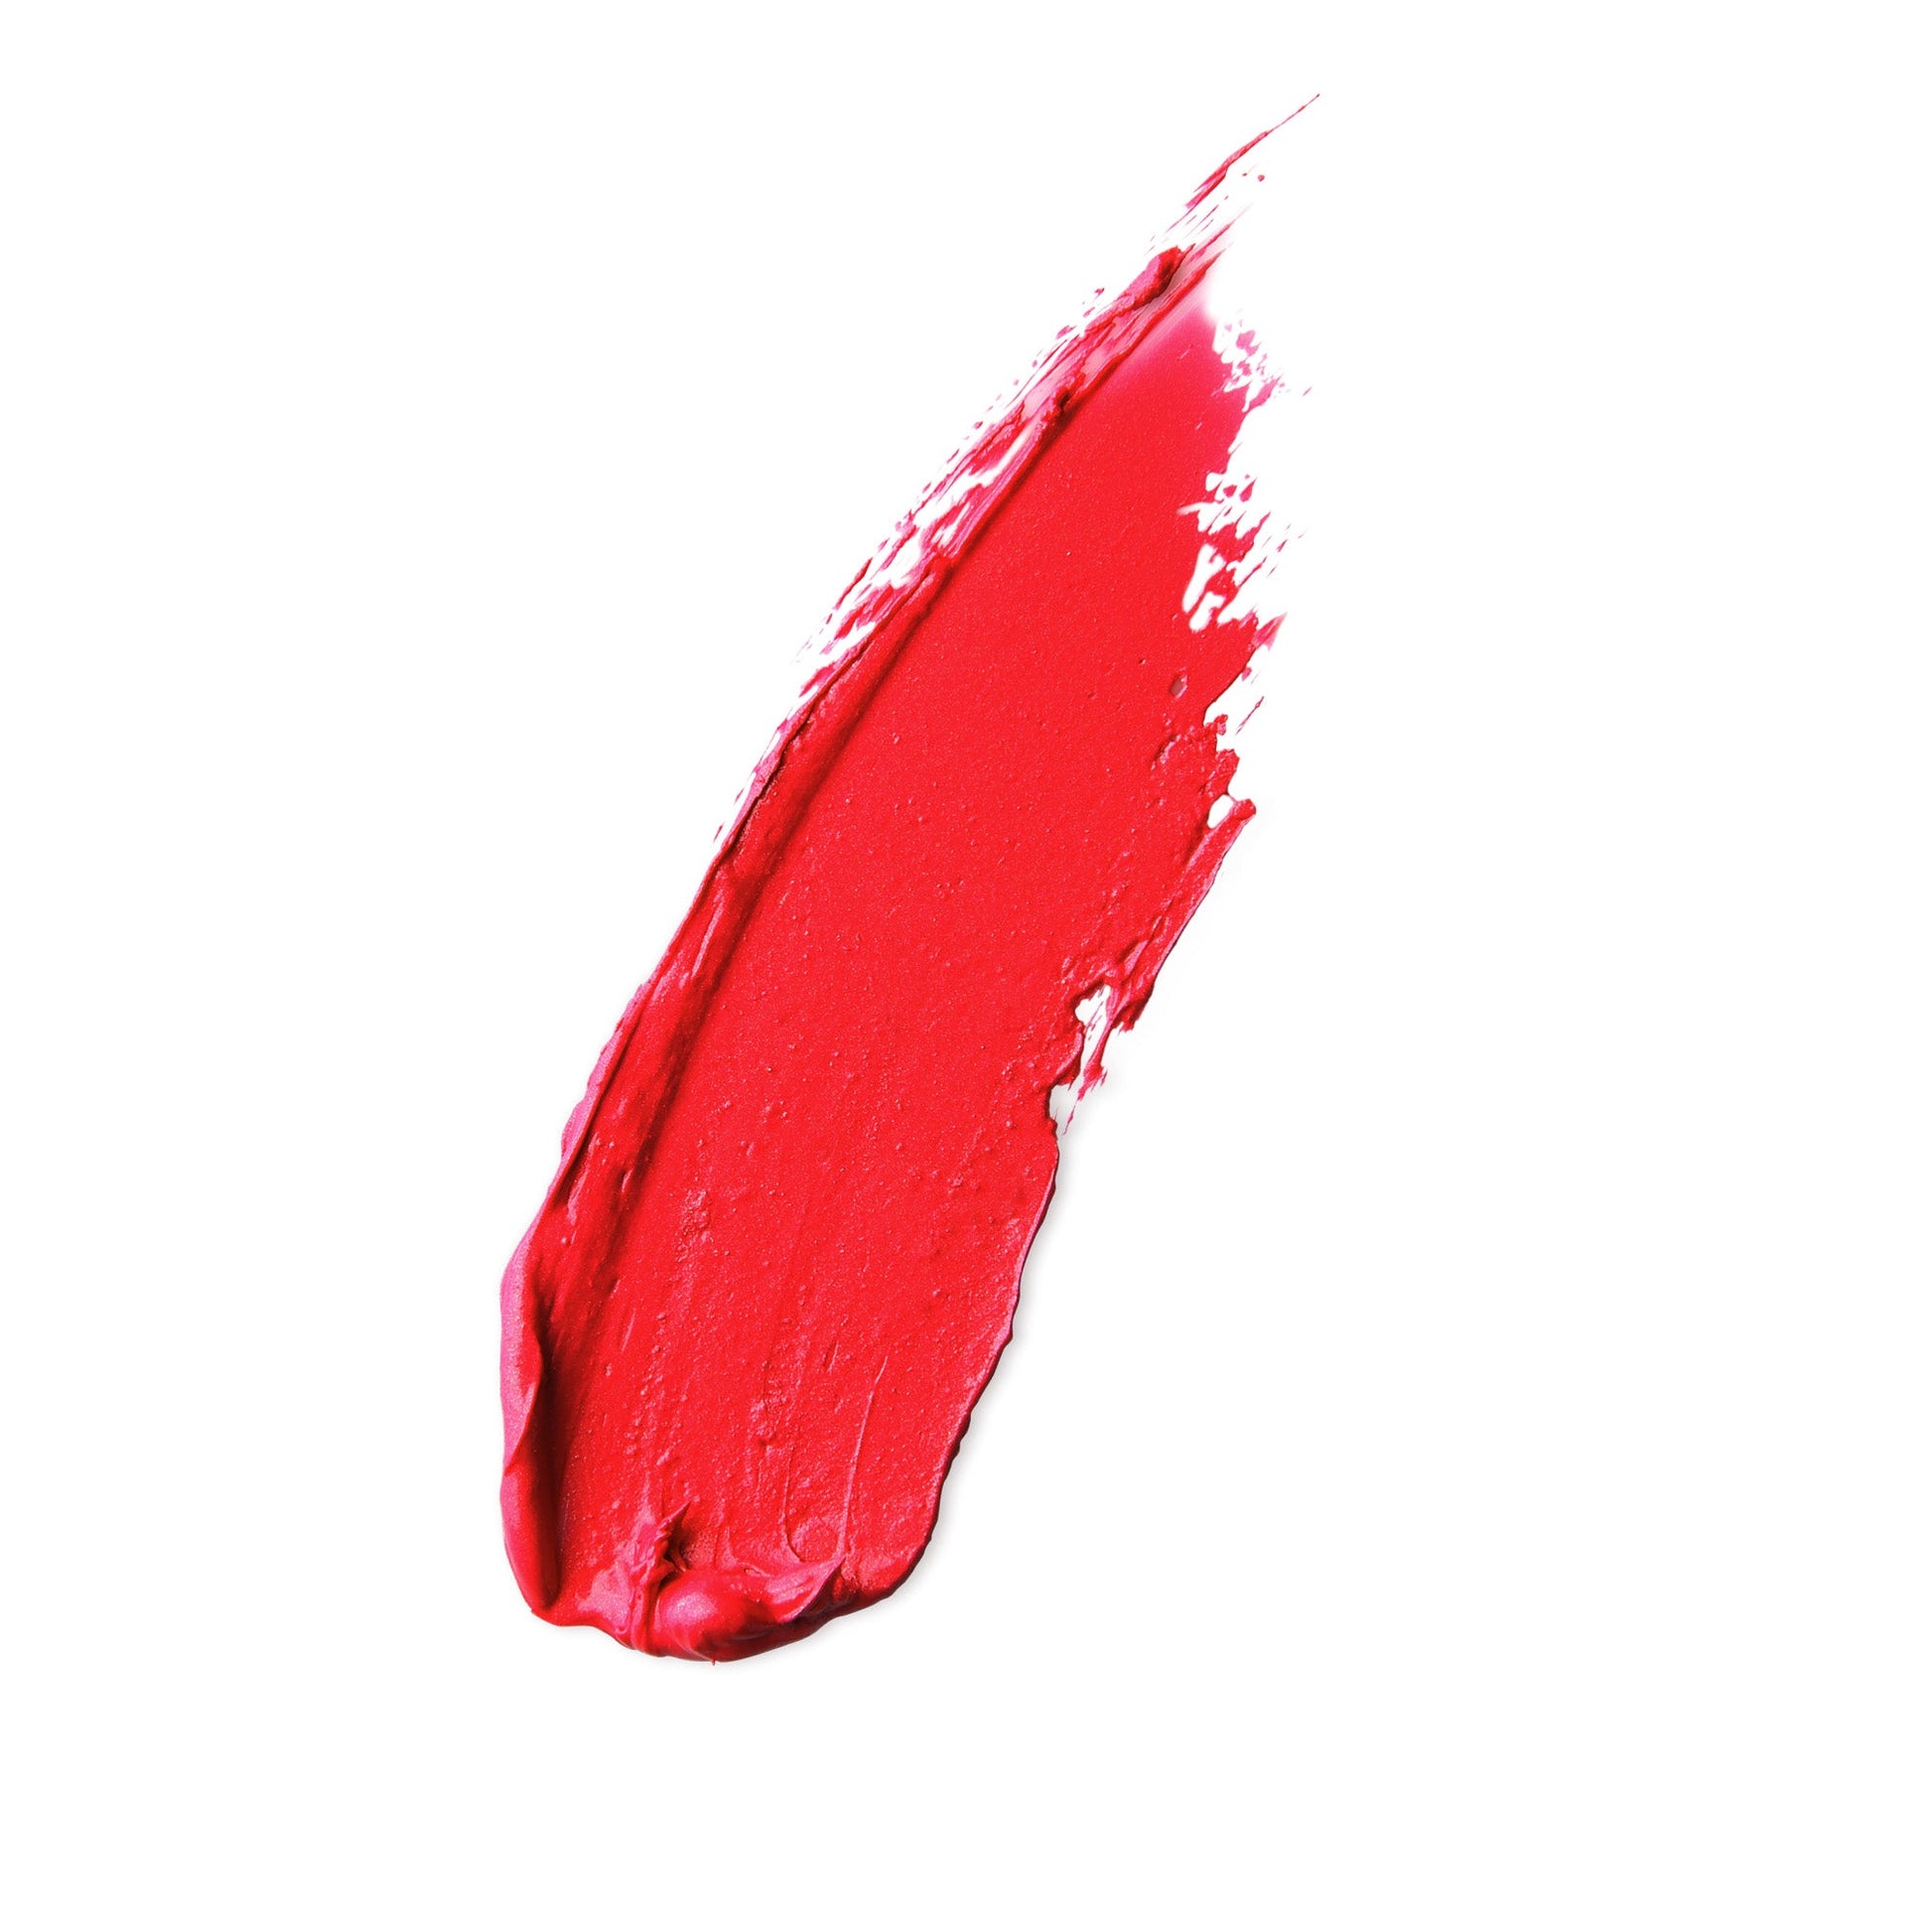 Forest Berry Red Moisture-Boost Natural Lipstick 4g - Antipodes New Zealand